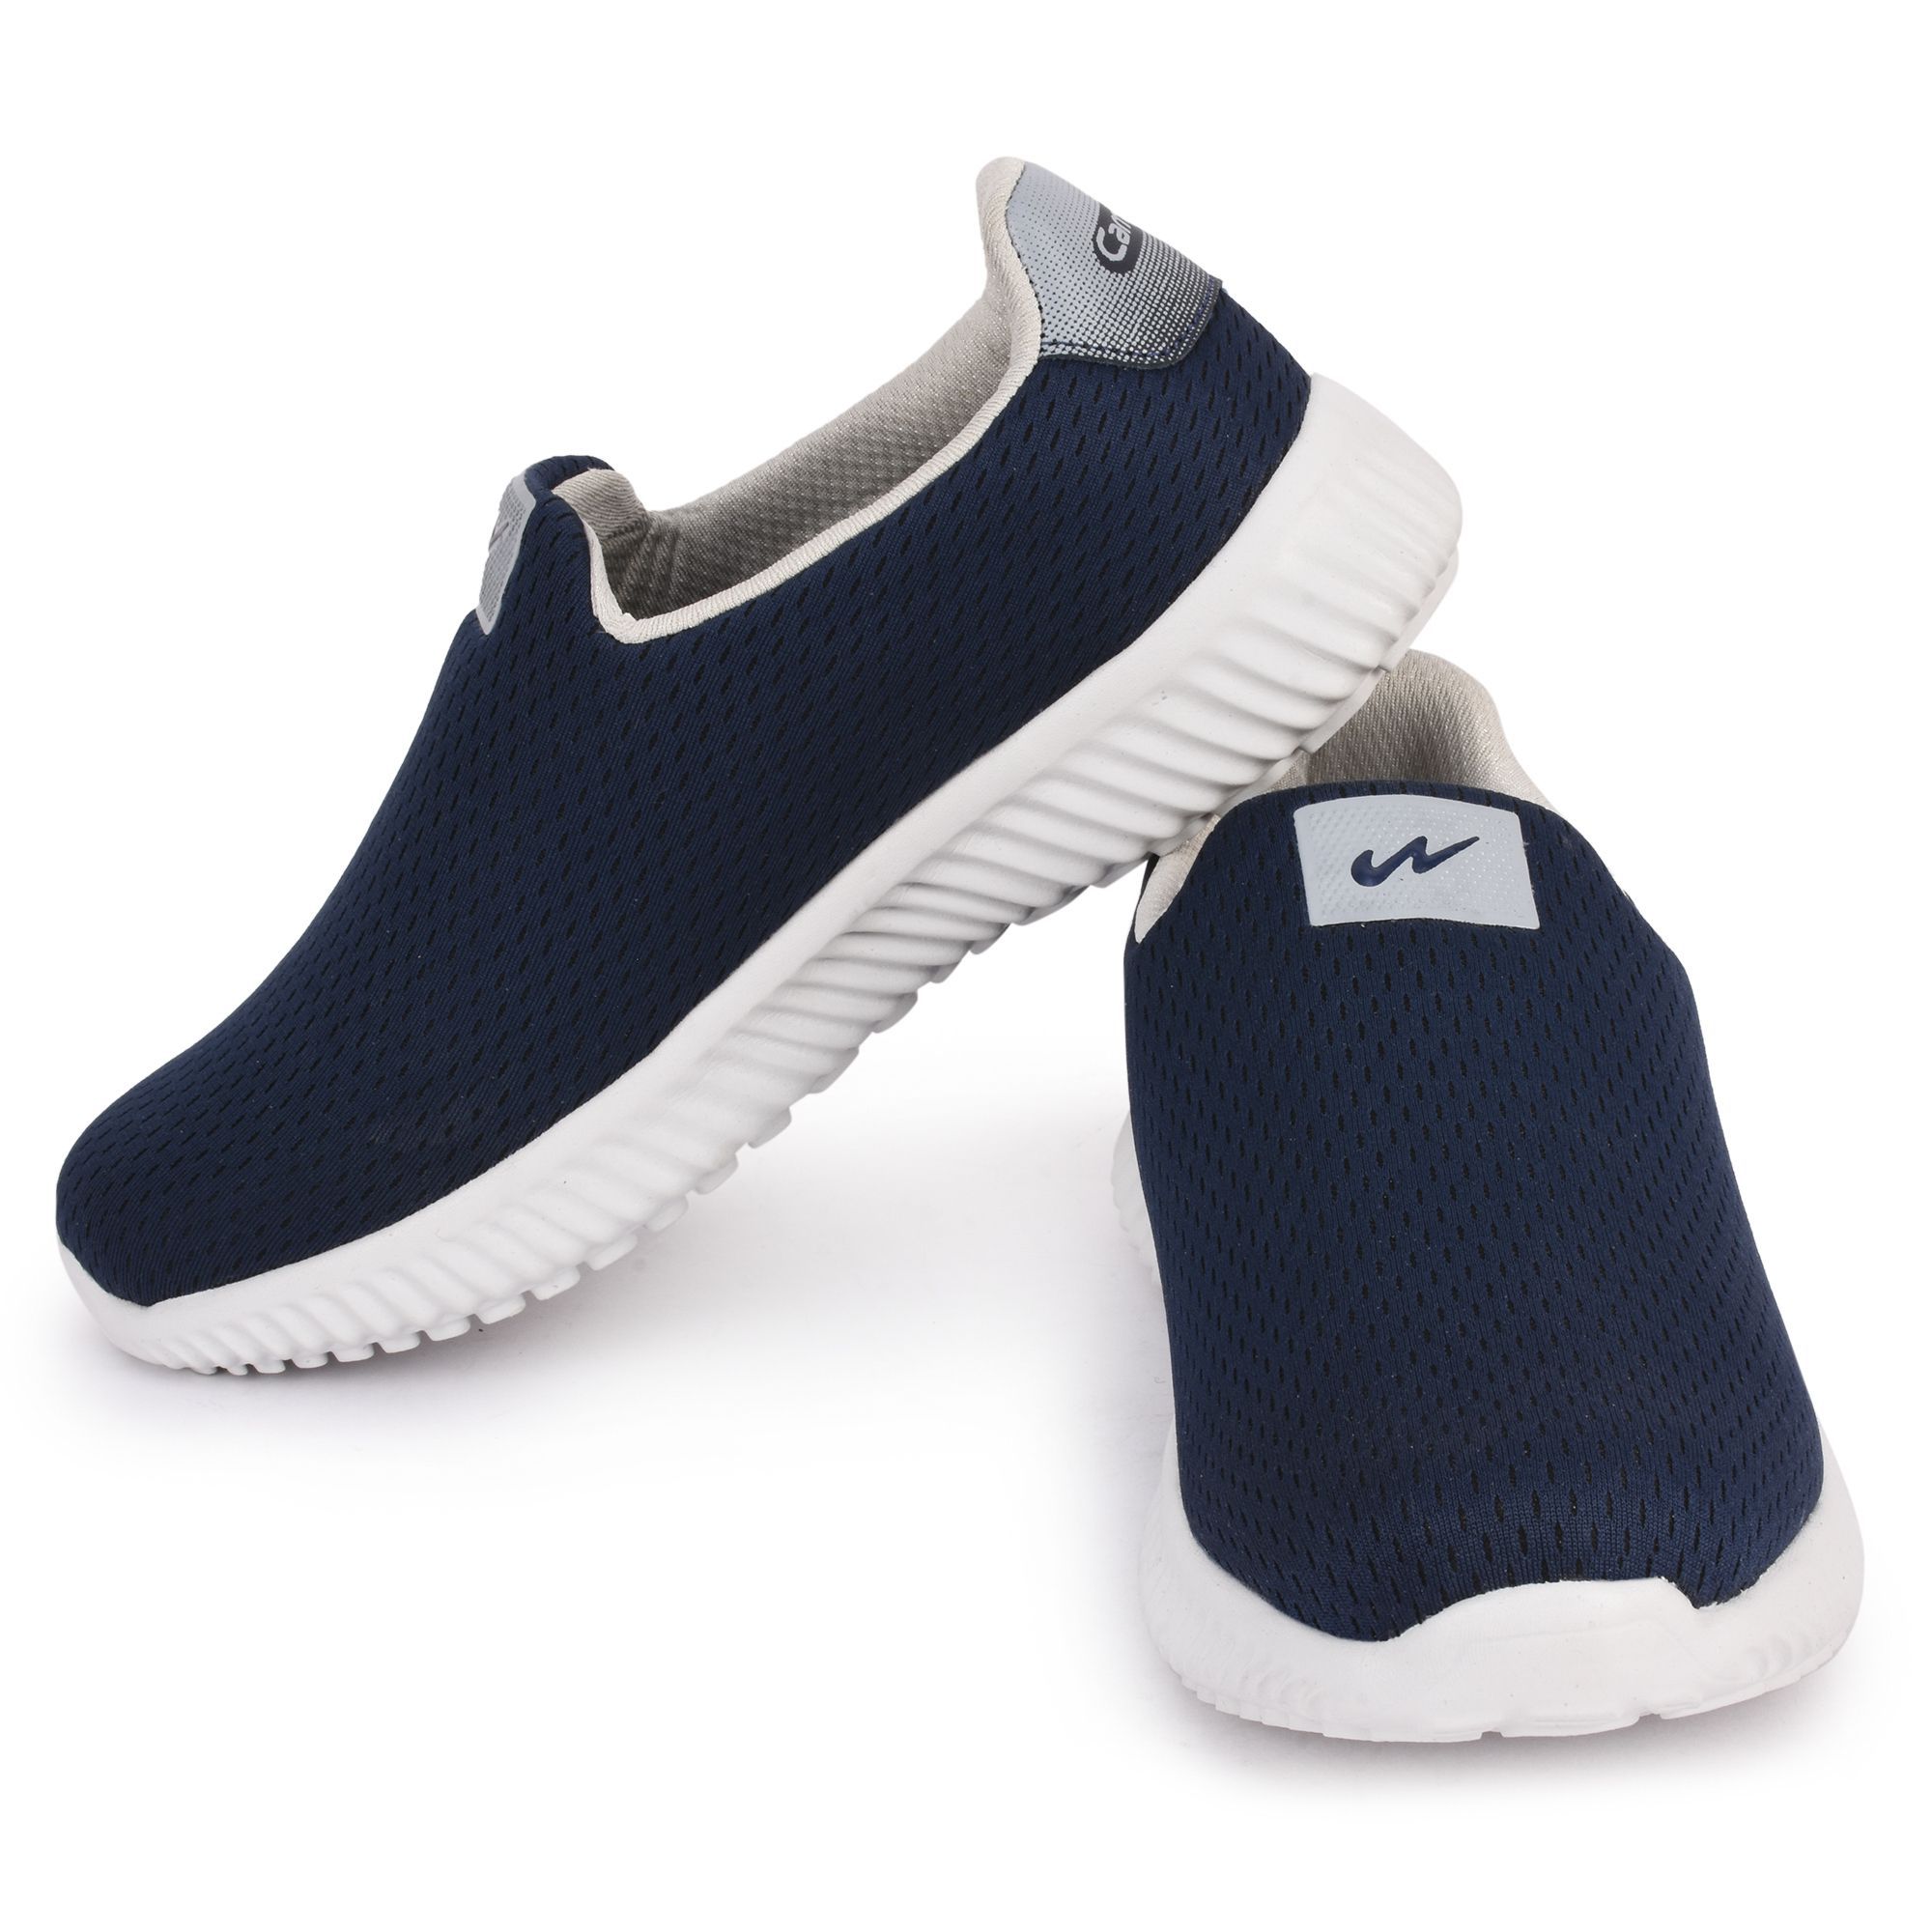 Campus OXYFIT Blue Running Shoes - Buy Campus OXYFIT Blue Running Shoes ...